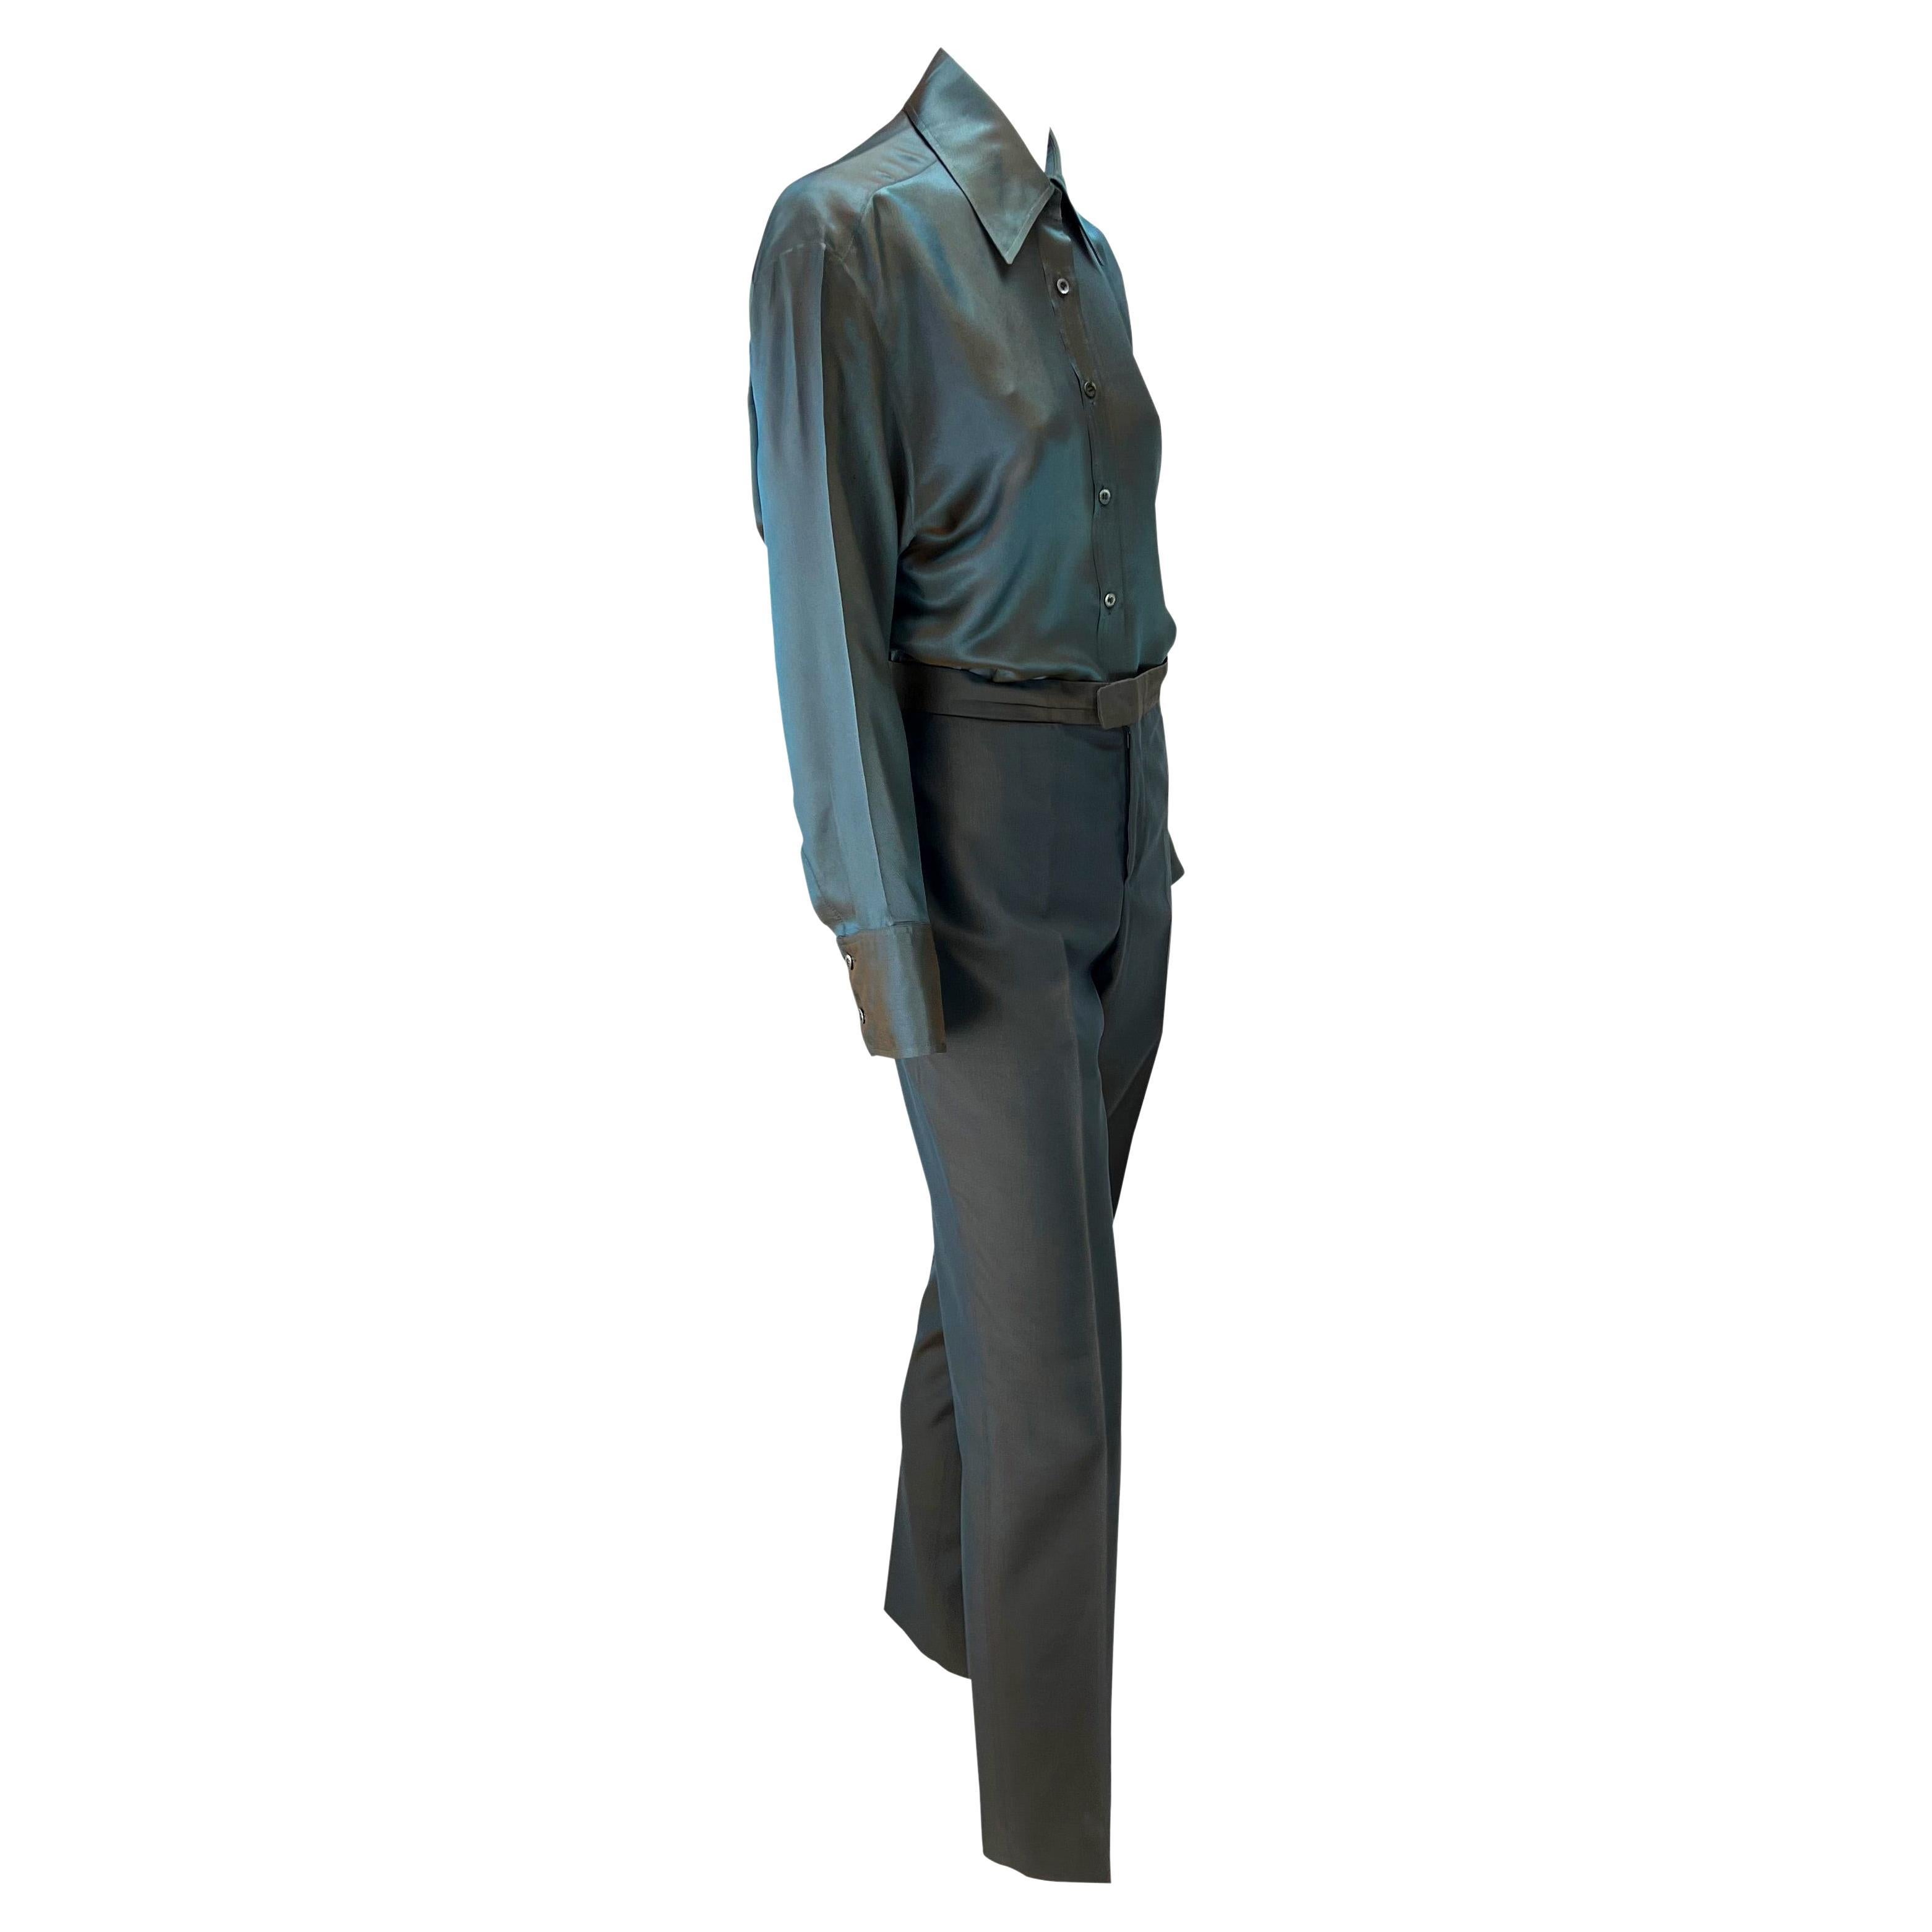 S/S 1998 Gucci by Tom Ford Runway Iridescent Satin Grey Rust Button Up Pant Set For Sale 2